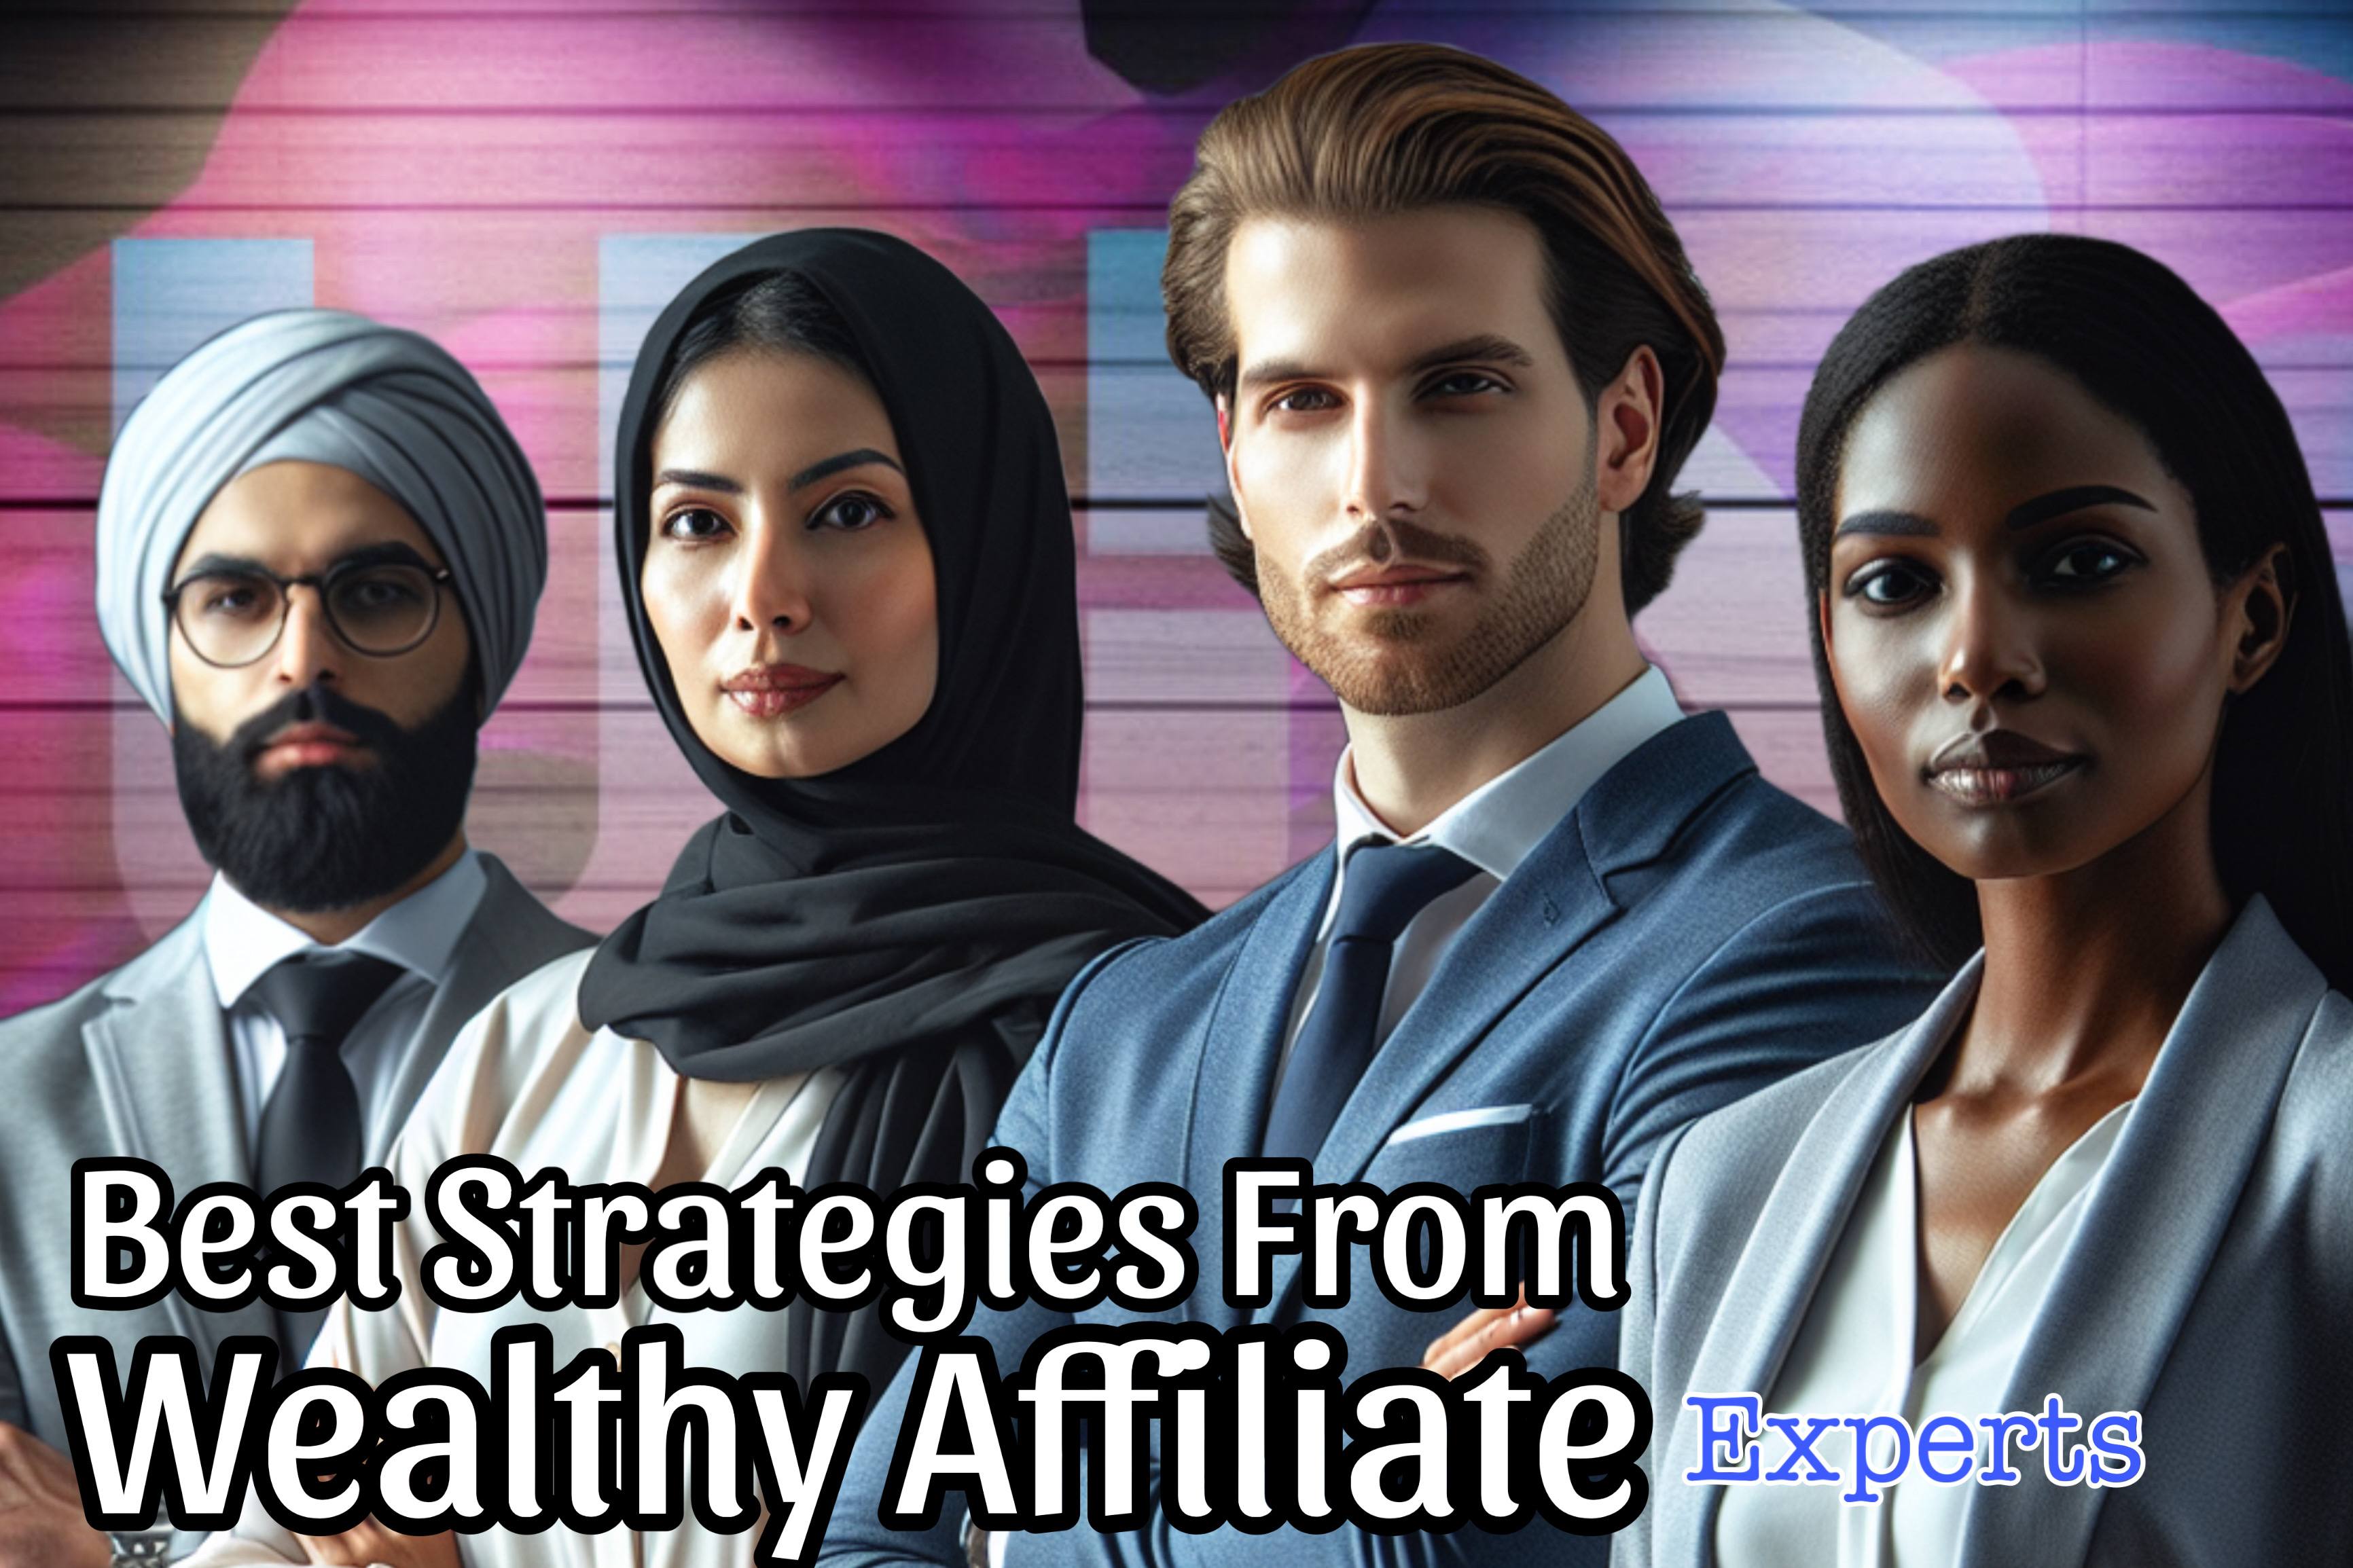 Best Strategies From Wealthy Affiliate Experts